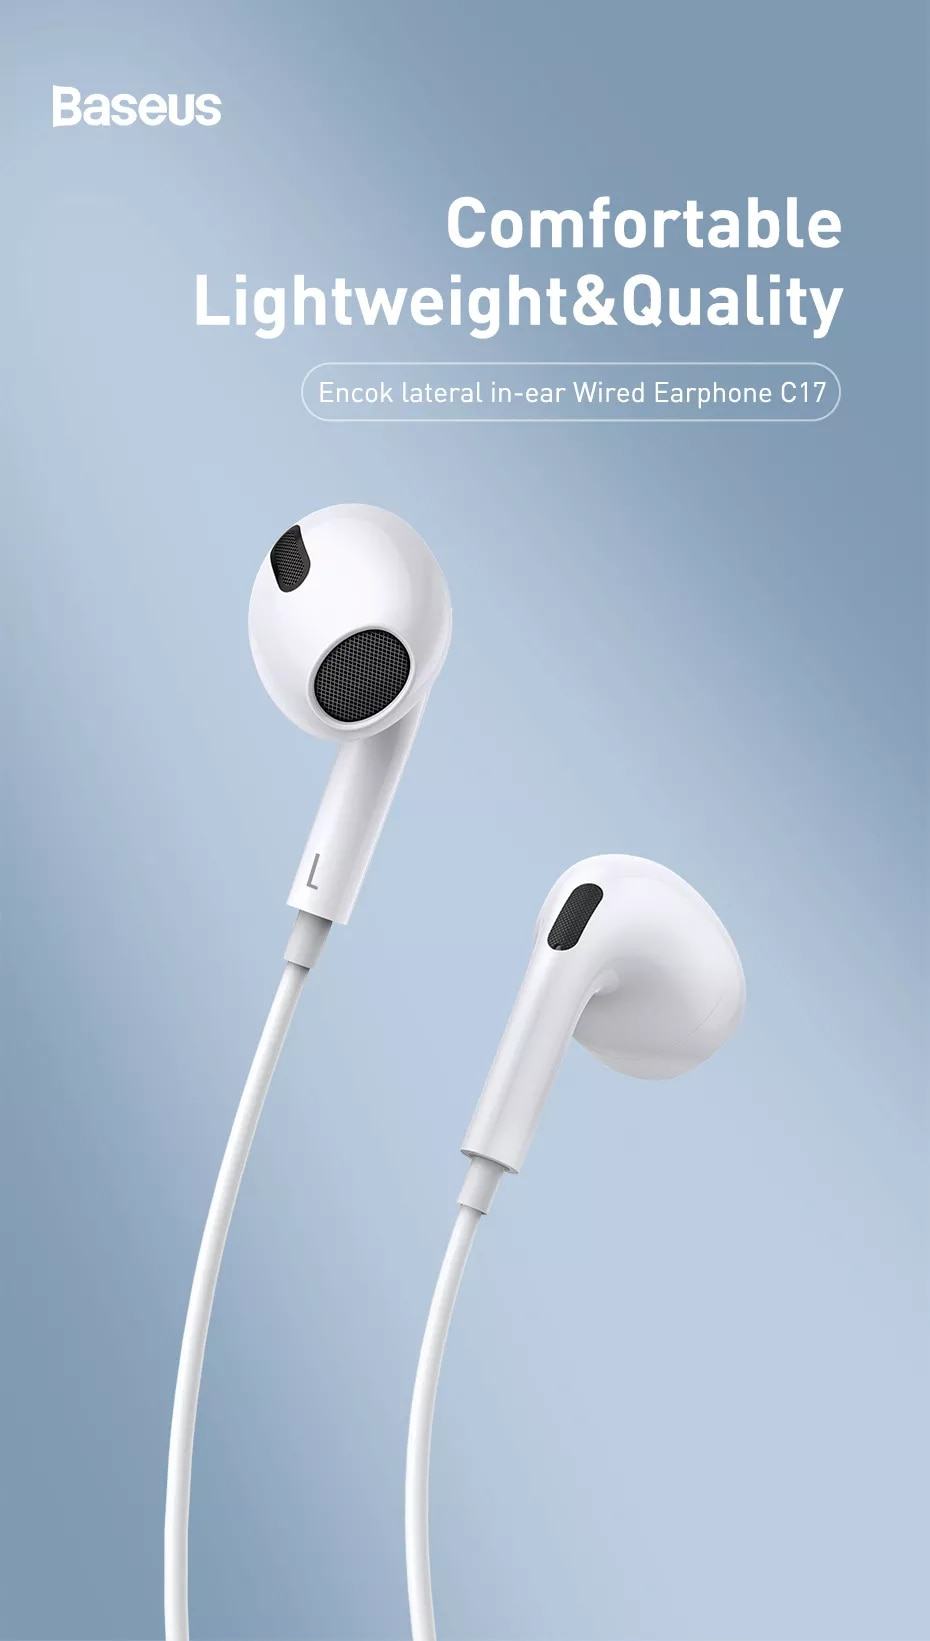 Tai Nghe Type-C Baseus Encok lateral in-ear Wired Earphone C17 Cho Smartphone & iPad Pro (10)